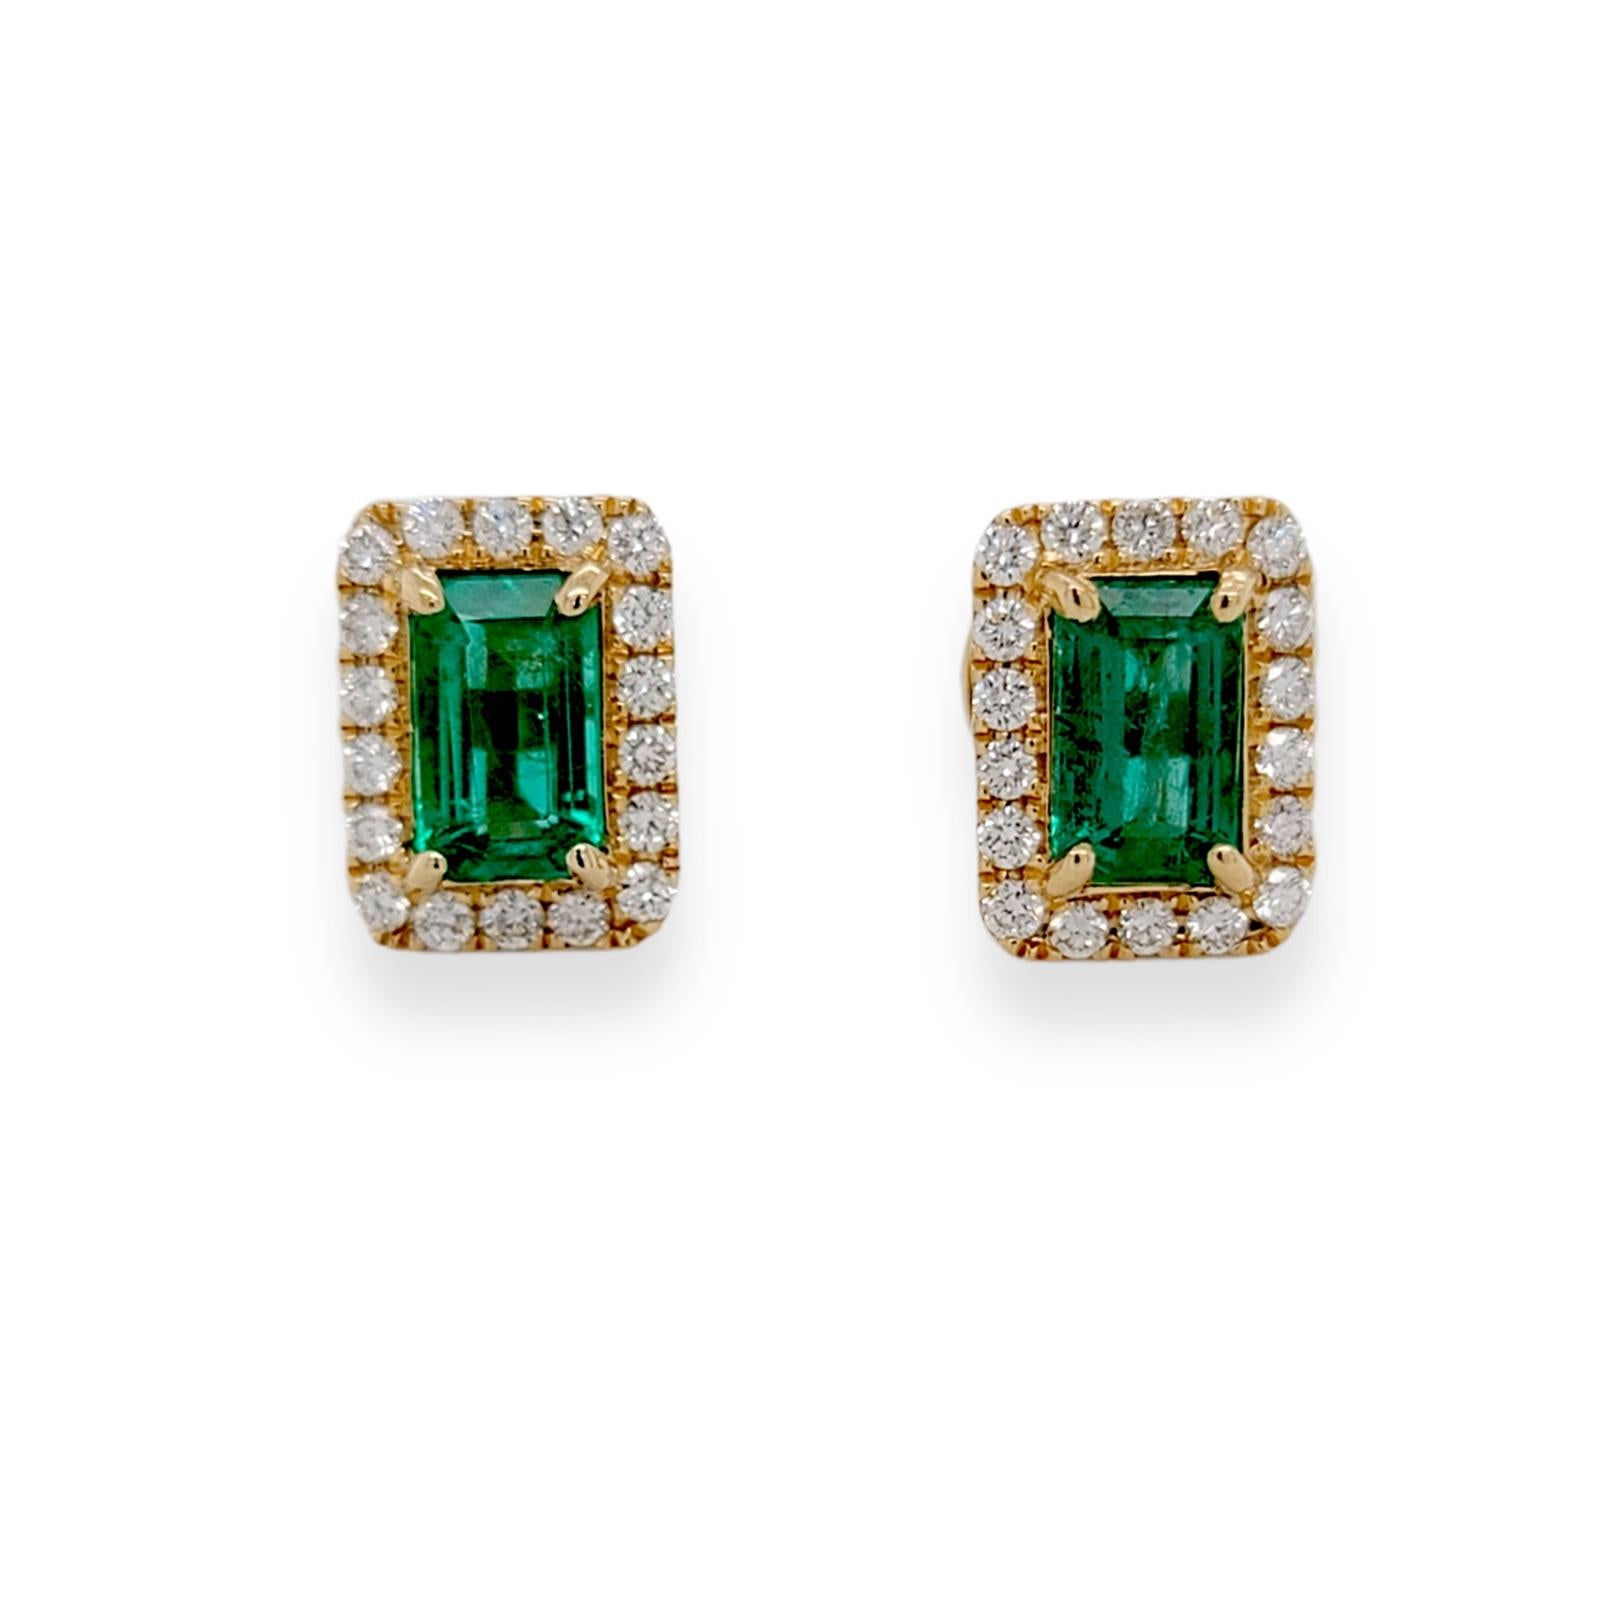 100% Authentic, 100% Customer Satisfaction

Height: 9.5 mm

Width: 7 mm

Metal:14K Yellow Gold

Hallmarks: 14K

Total Weight: 2.5 Grams

Stone Type: 1.10 CT Natural Emerald & G SI2 0.30 CT Diamonds G SI1

Condition: New

Estimated Price: